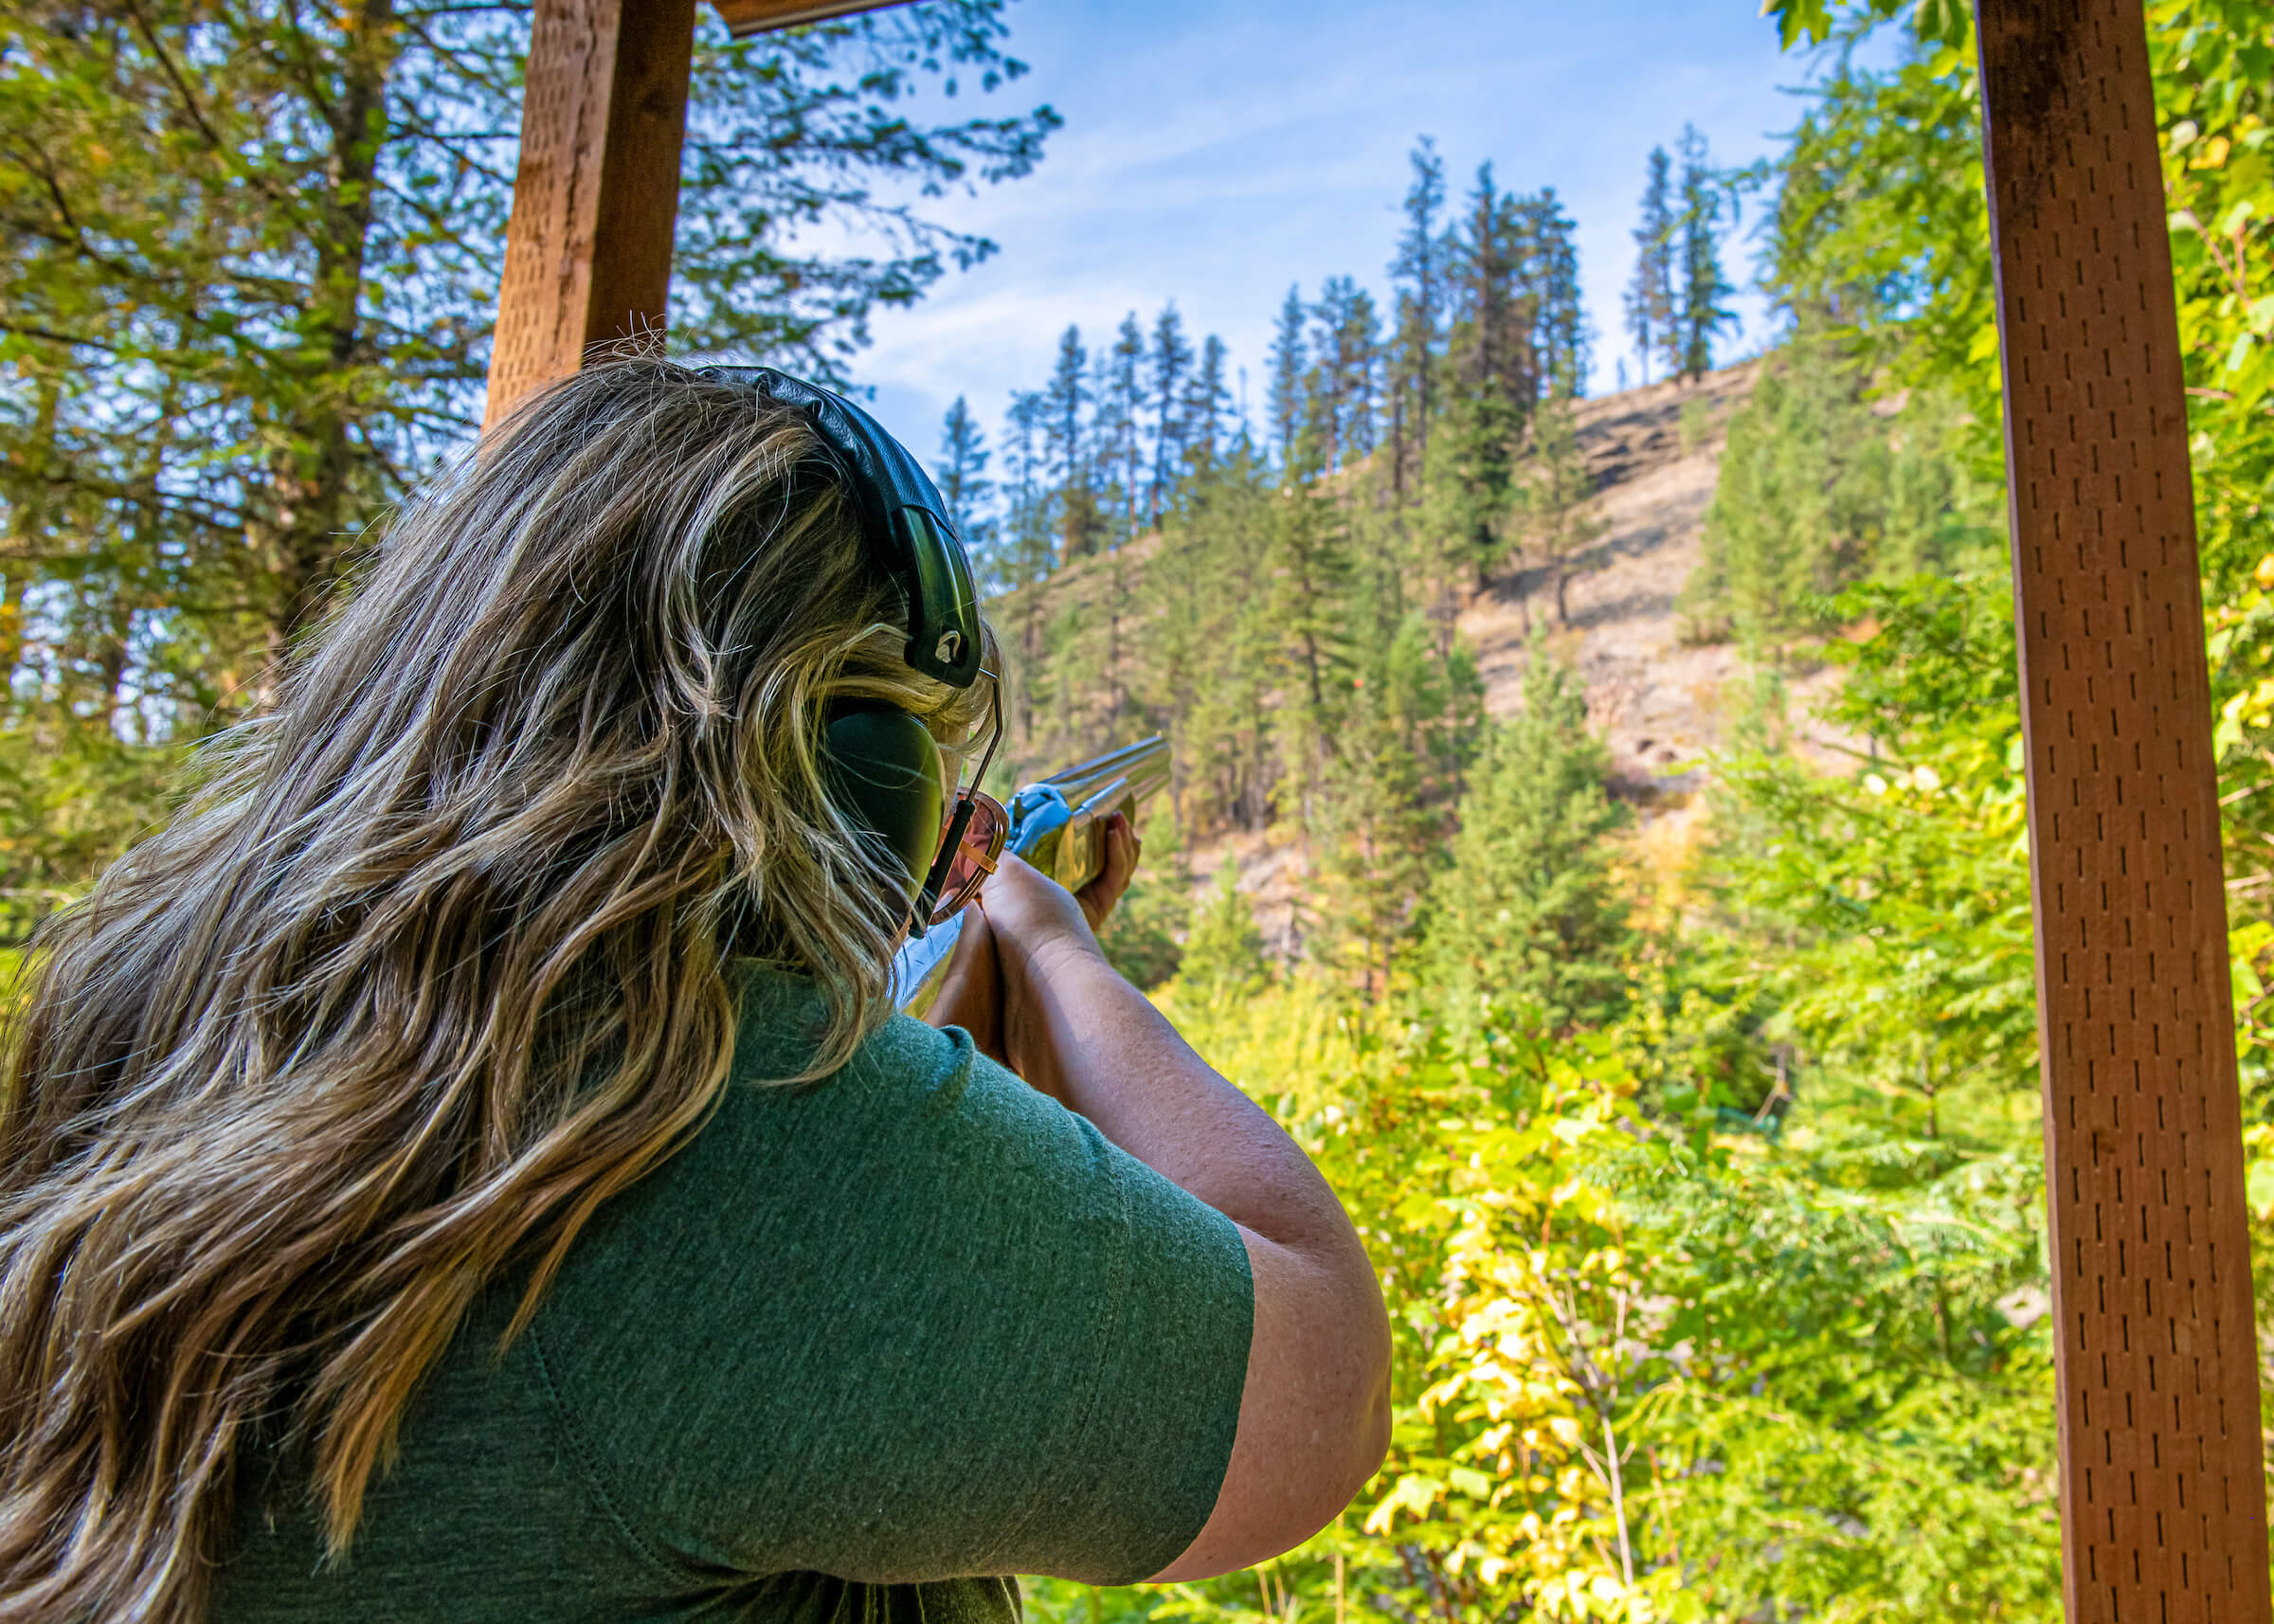 A young outdoor enthusiast tries her hand at sporting clay shooting at Red Horse Mountain Ranch.